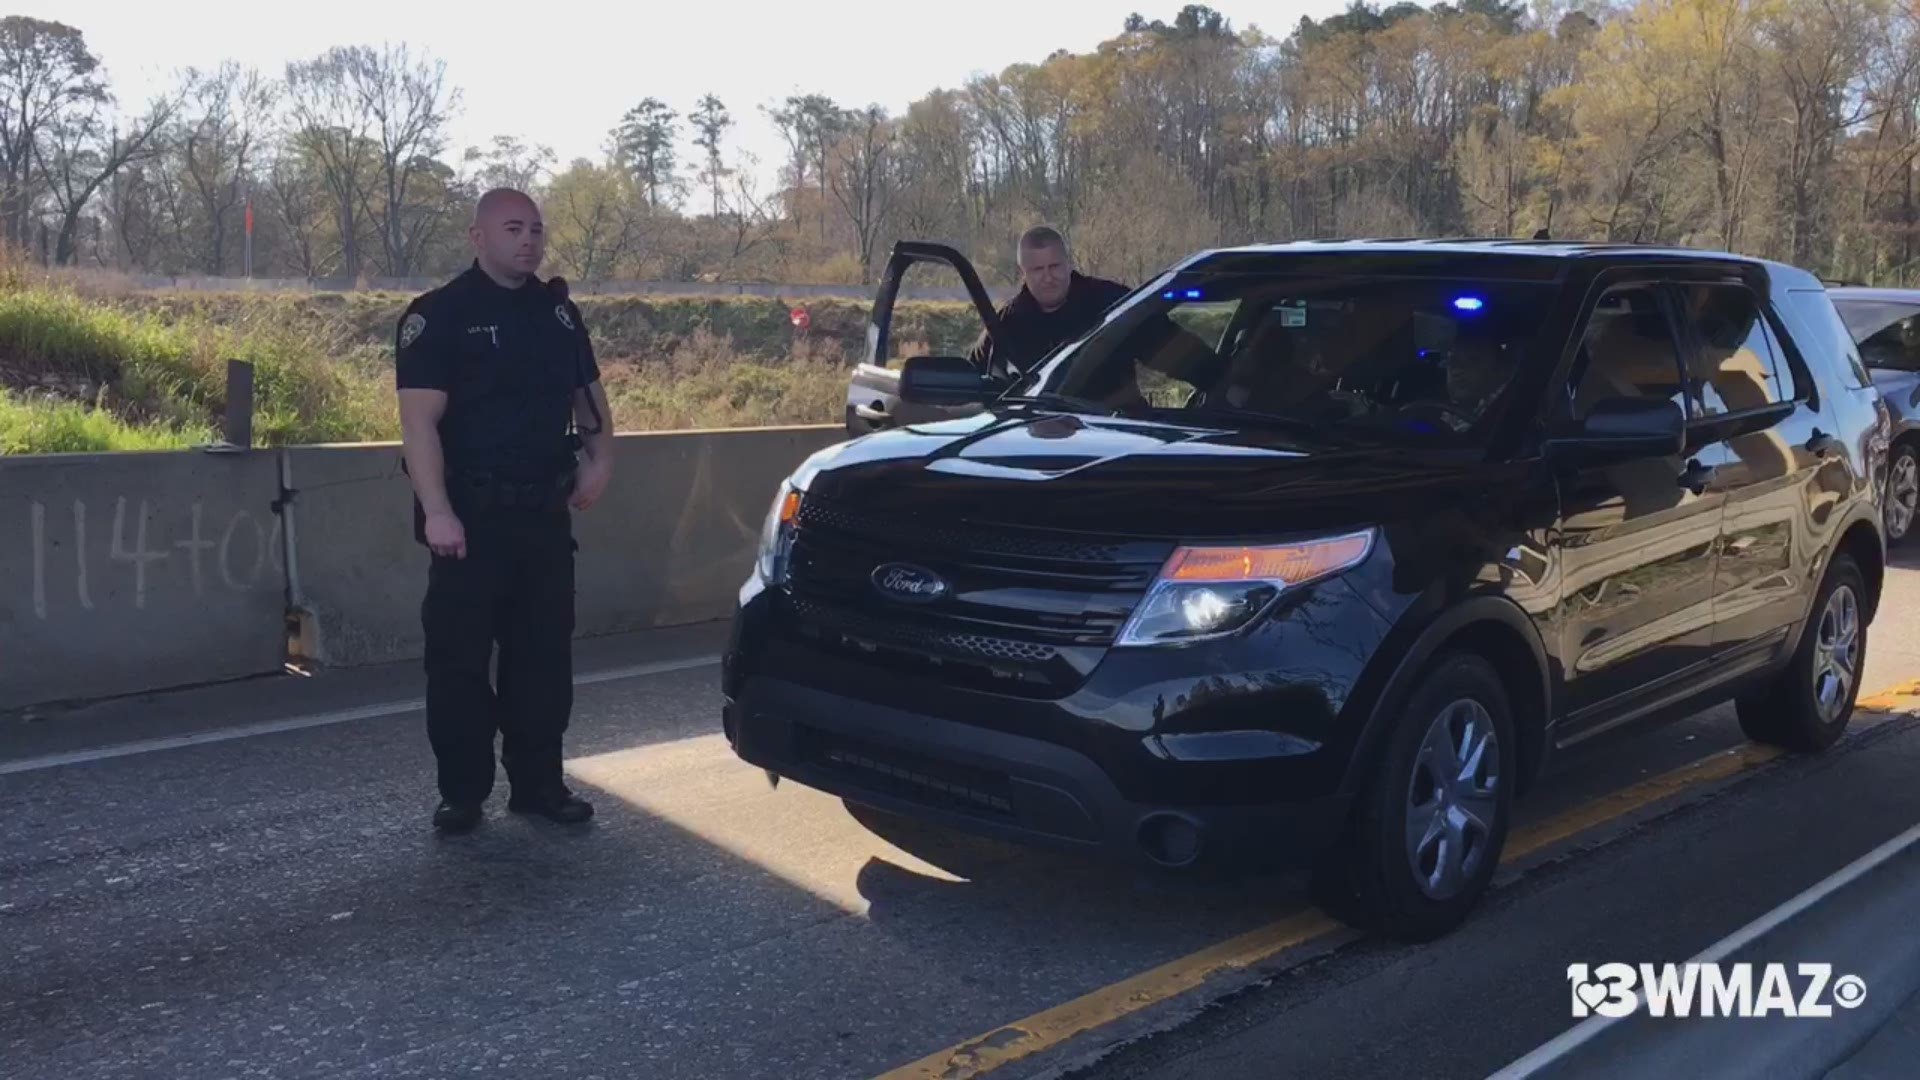 A police chase on I-75 South that started in Butts County ended in Macon around 9 a.m. Tuesday morning.